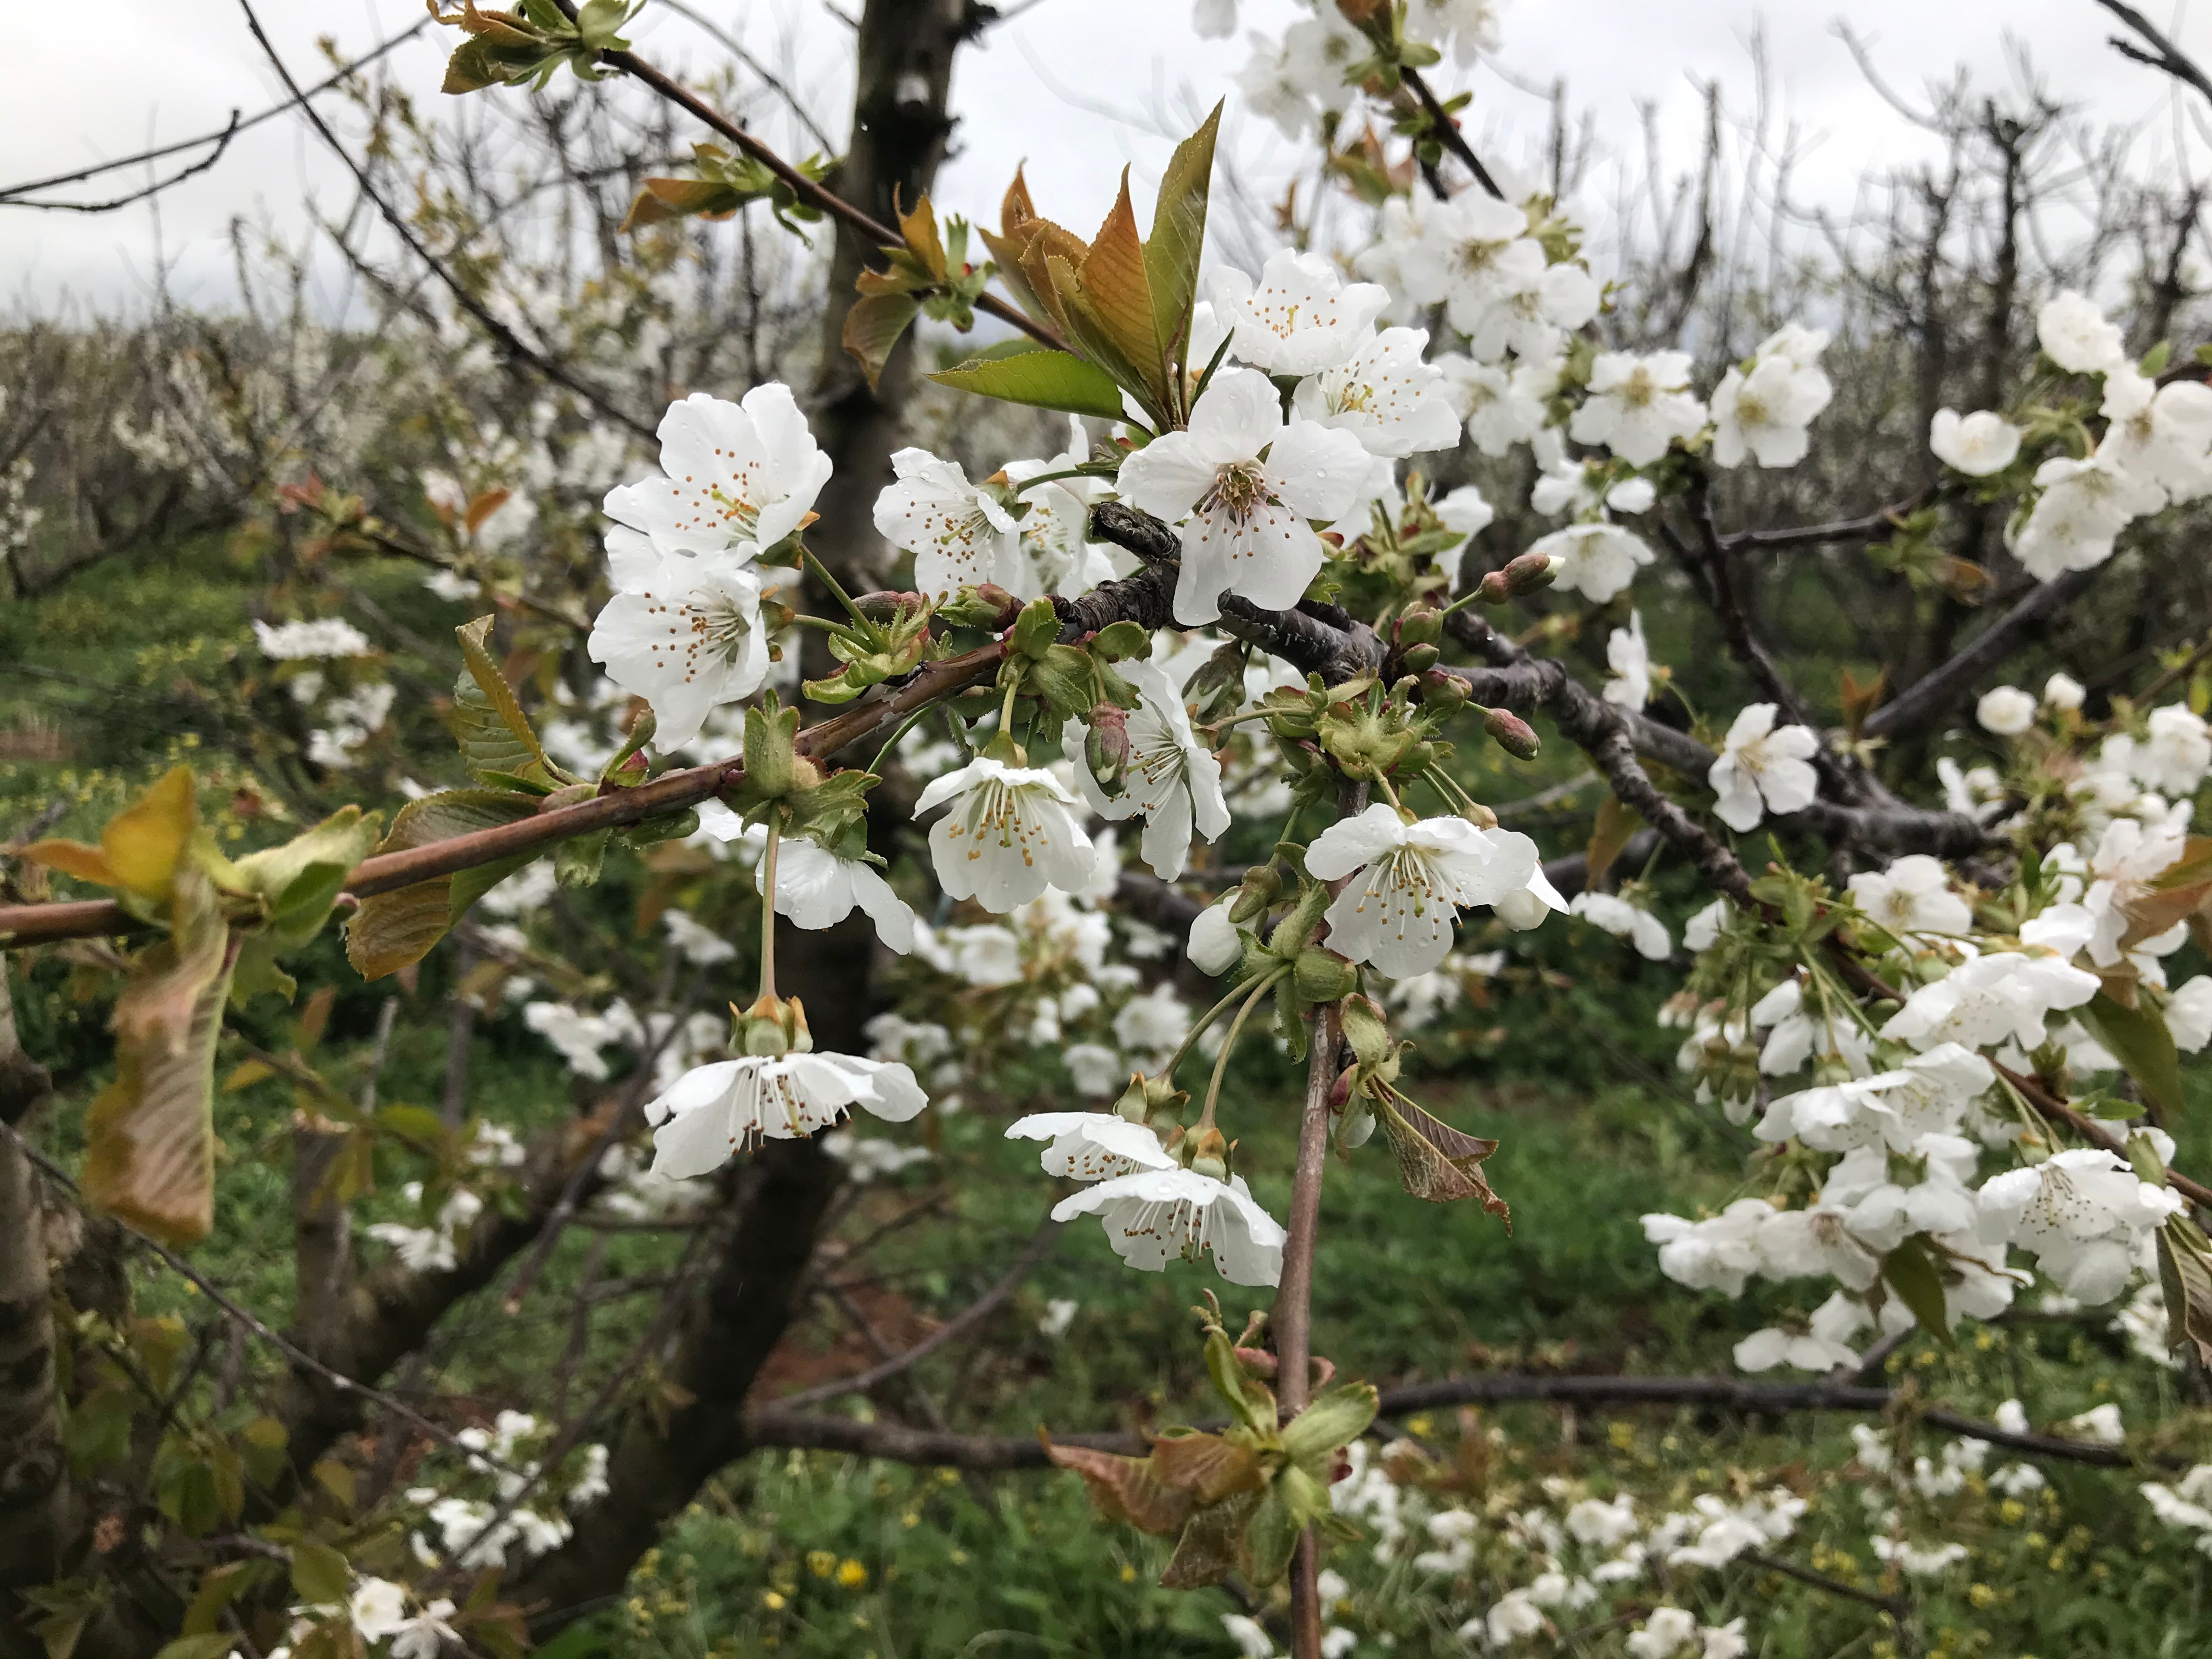 The cherry blossoms are set to drop in the coming weeks, and then the cherries will ripen.